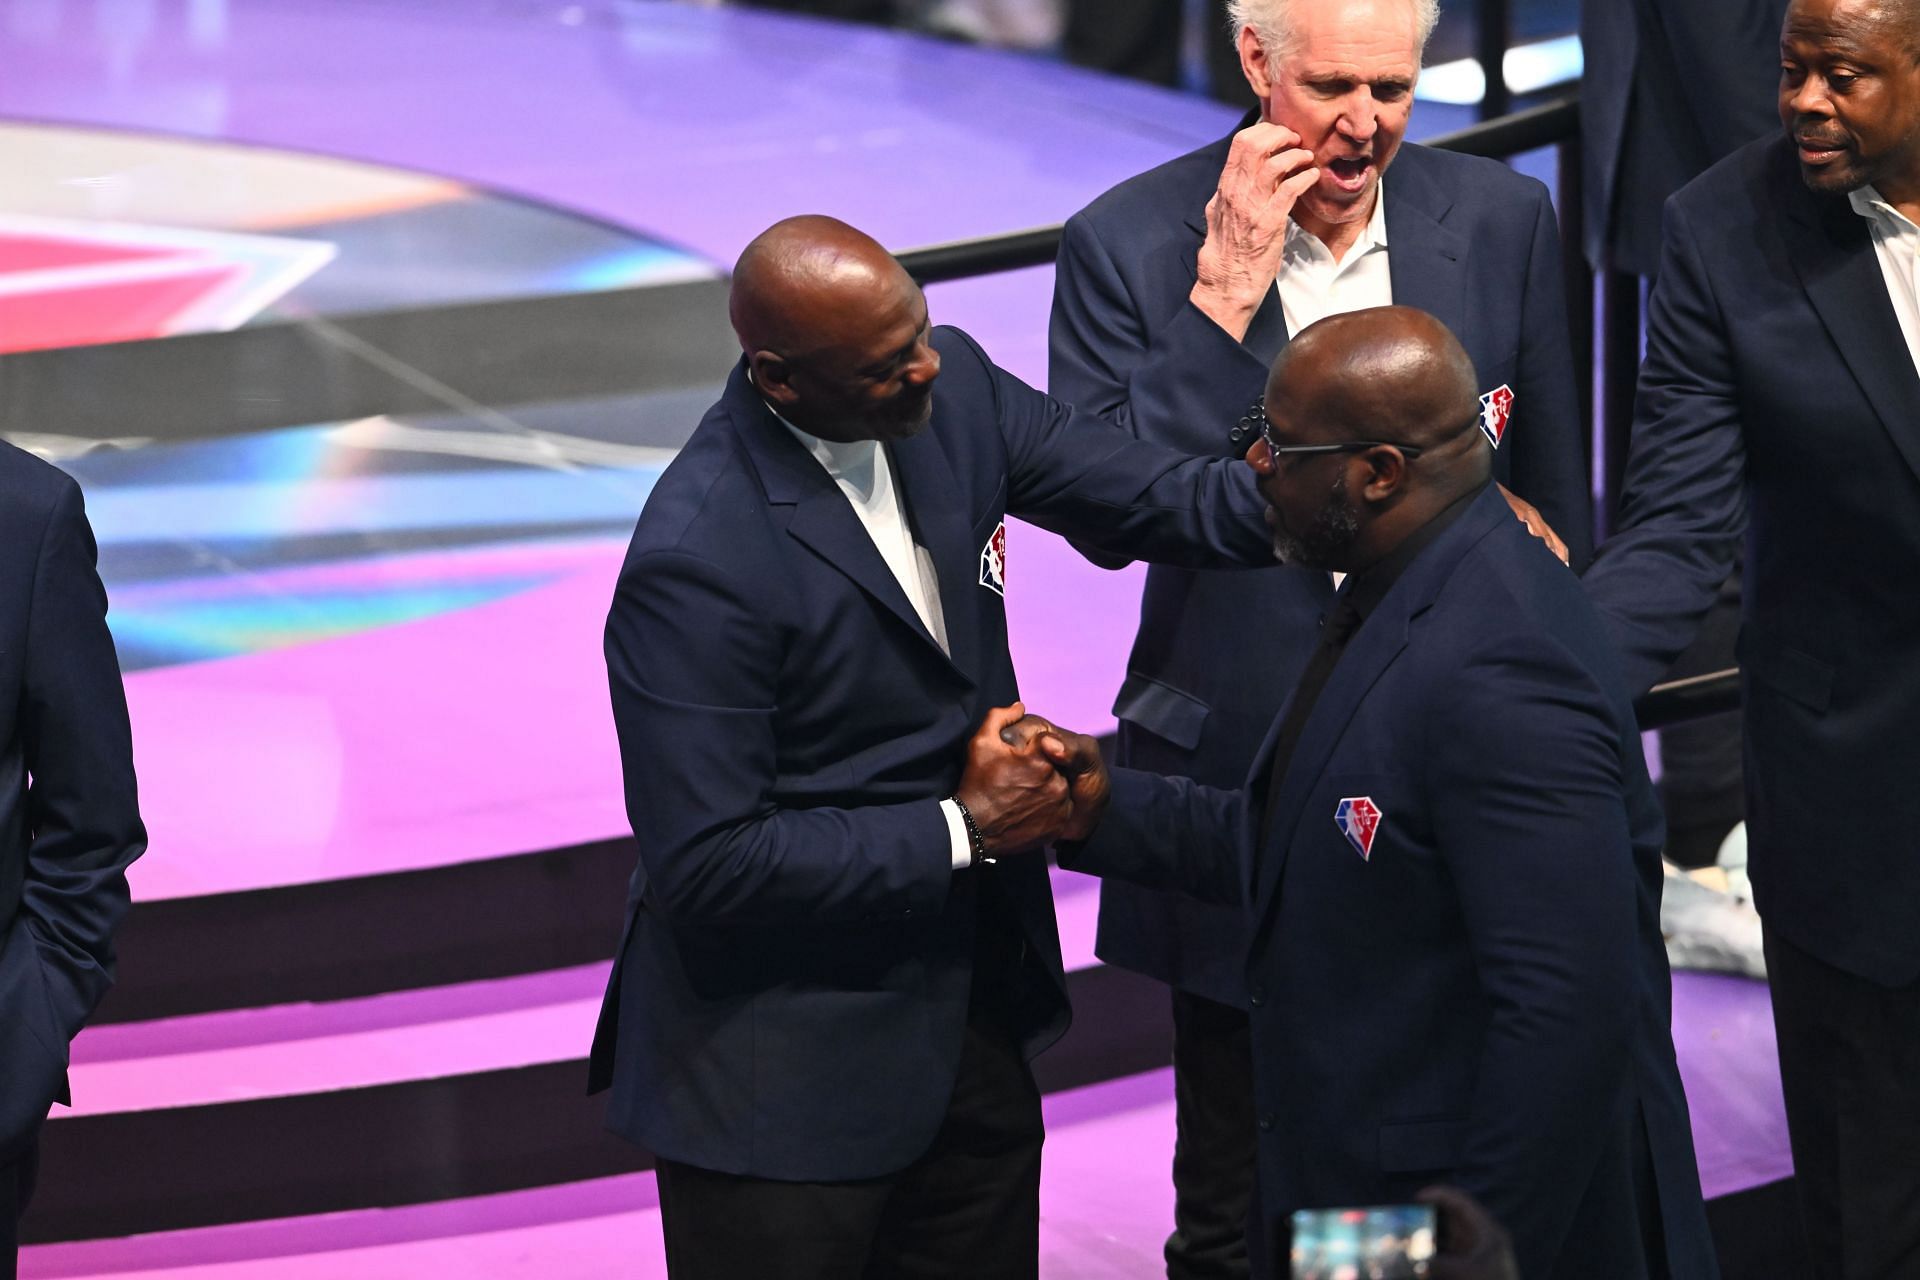 Shaquille O&#039;Neal and Michael Jordan interact after introduced as part of the NBA 75th Anniversary Team during the 2022 NBA All-Star Game at Rocket Mortgage Fieldhouse on February 20, 2022 in Cleveland, Ohio.